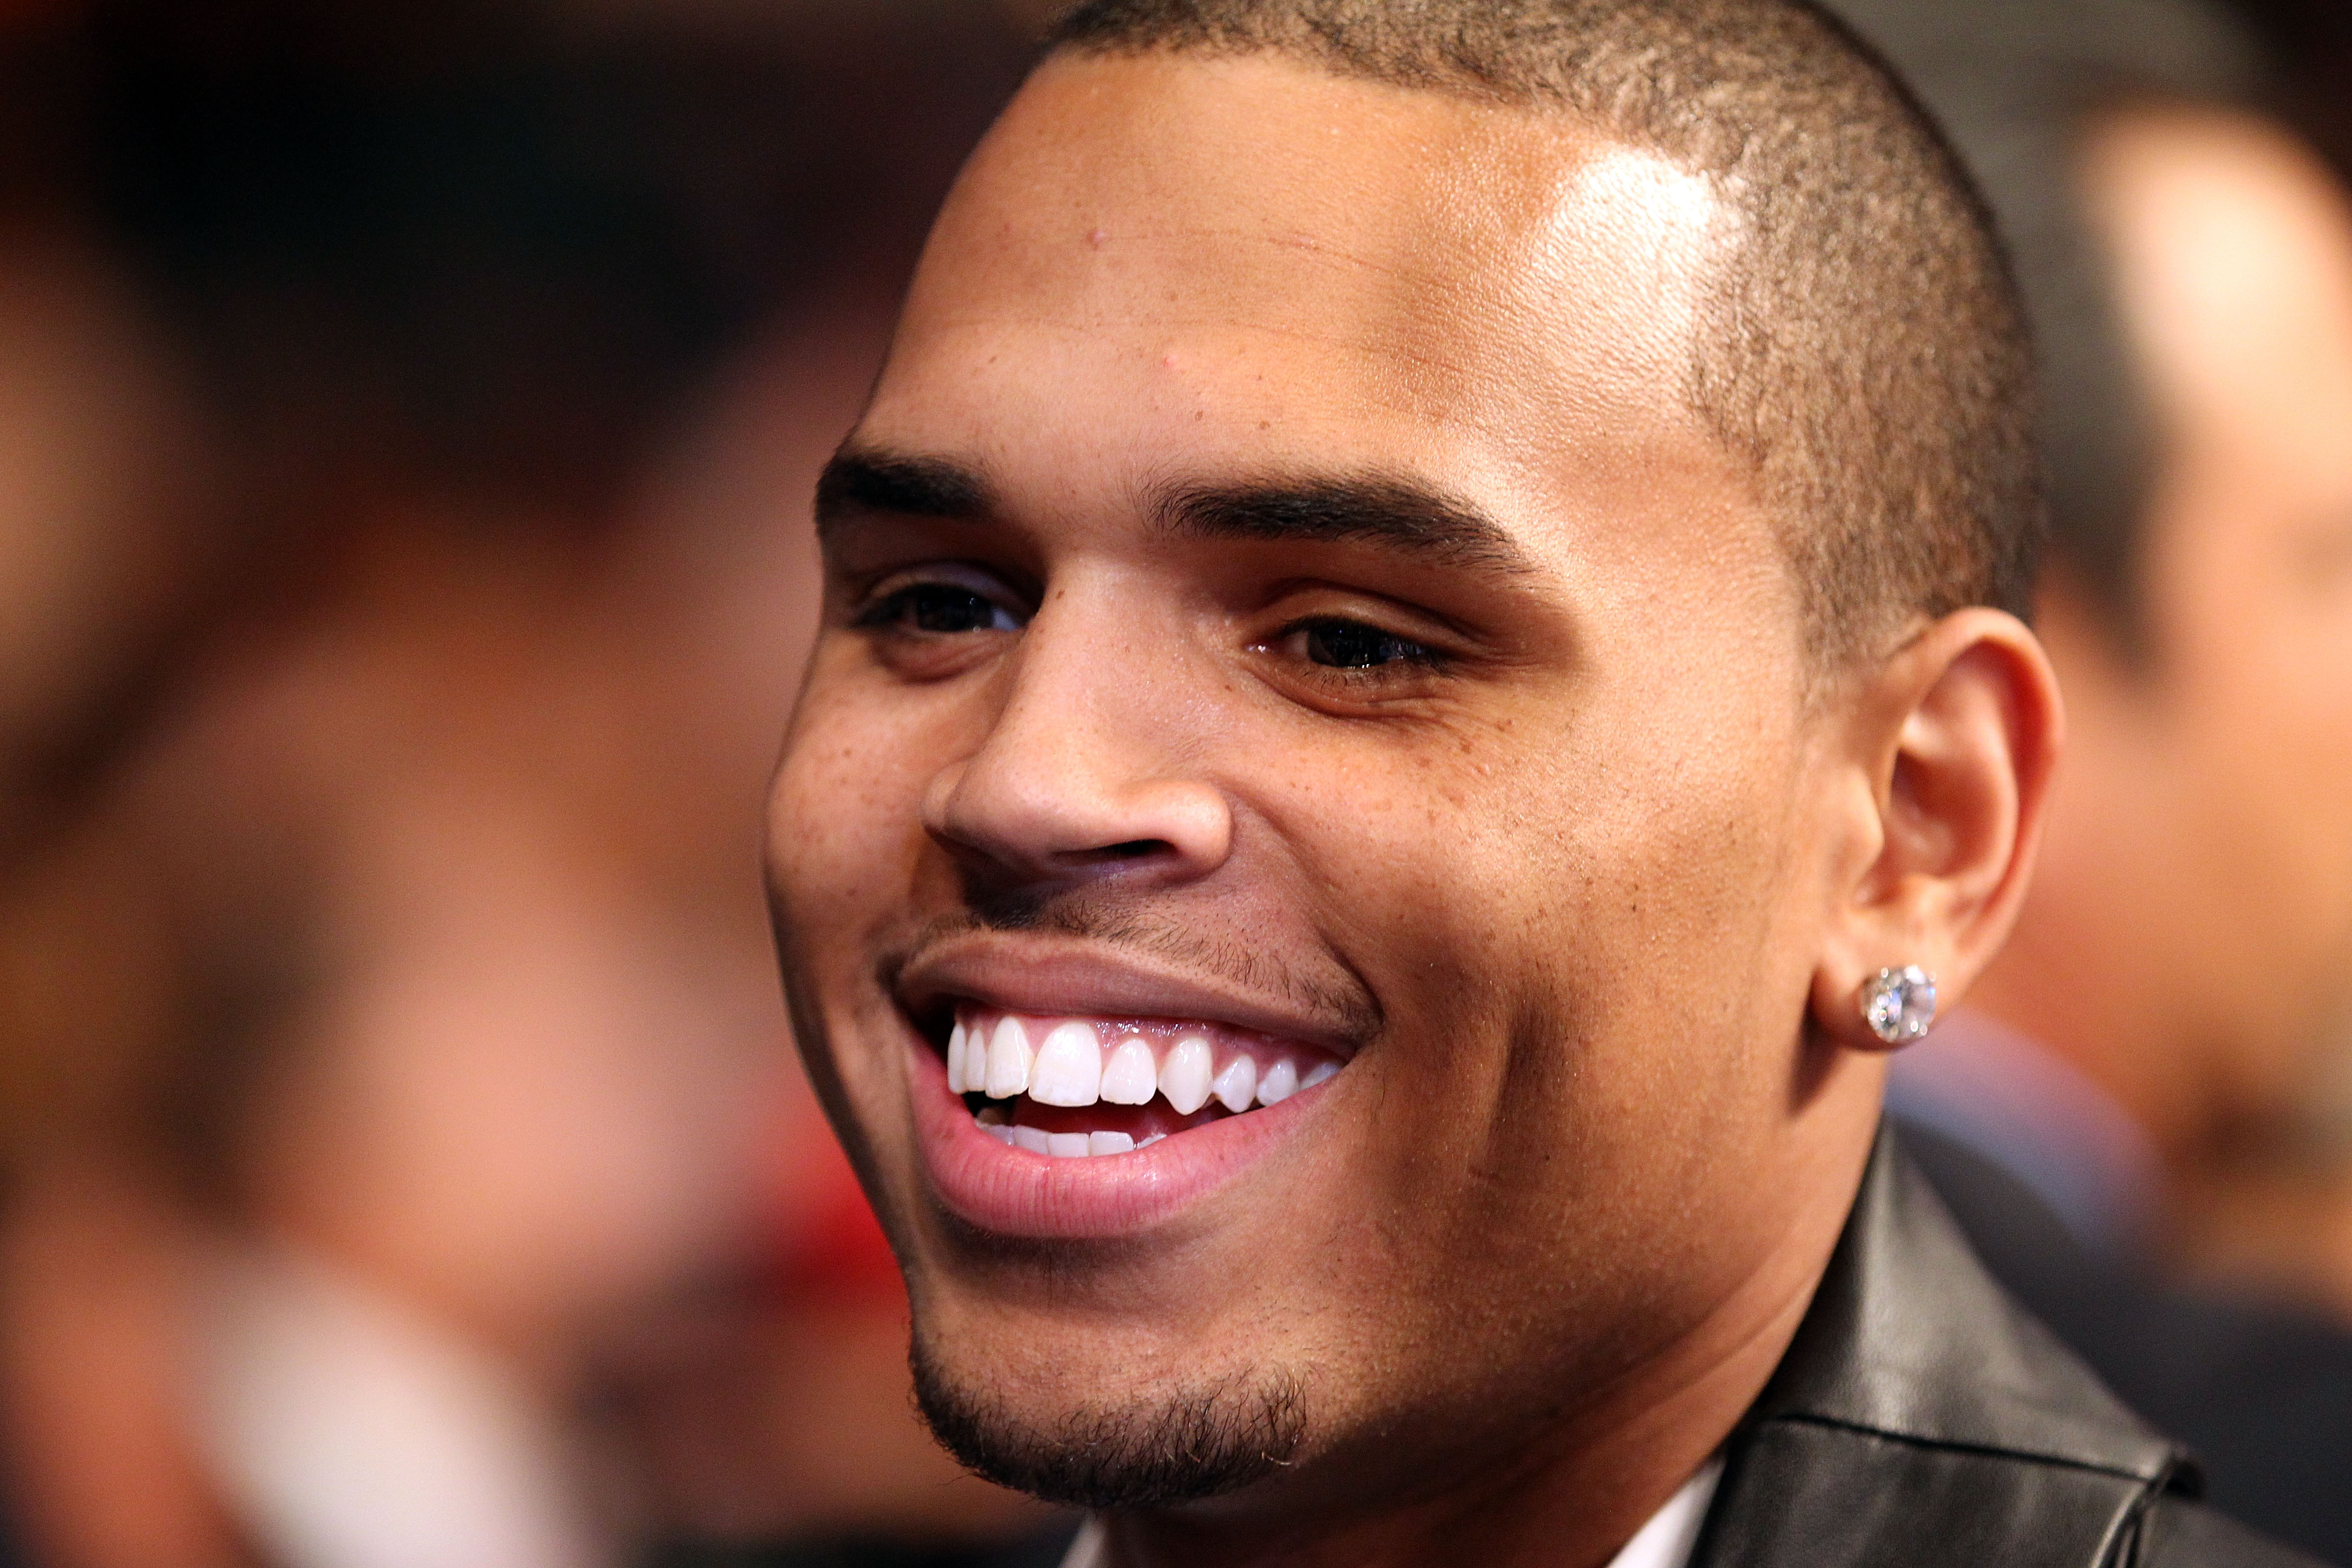 Chris Brown’s Baby Mama Received $20K Gift From Floyd Mayweather: Report